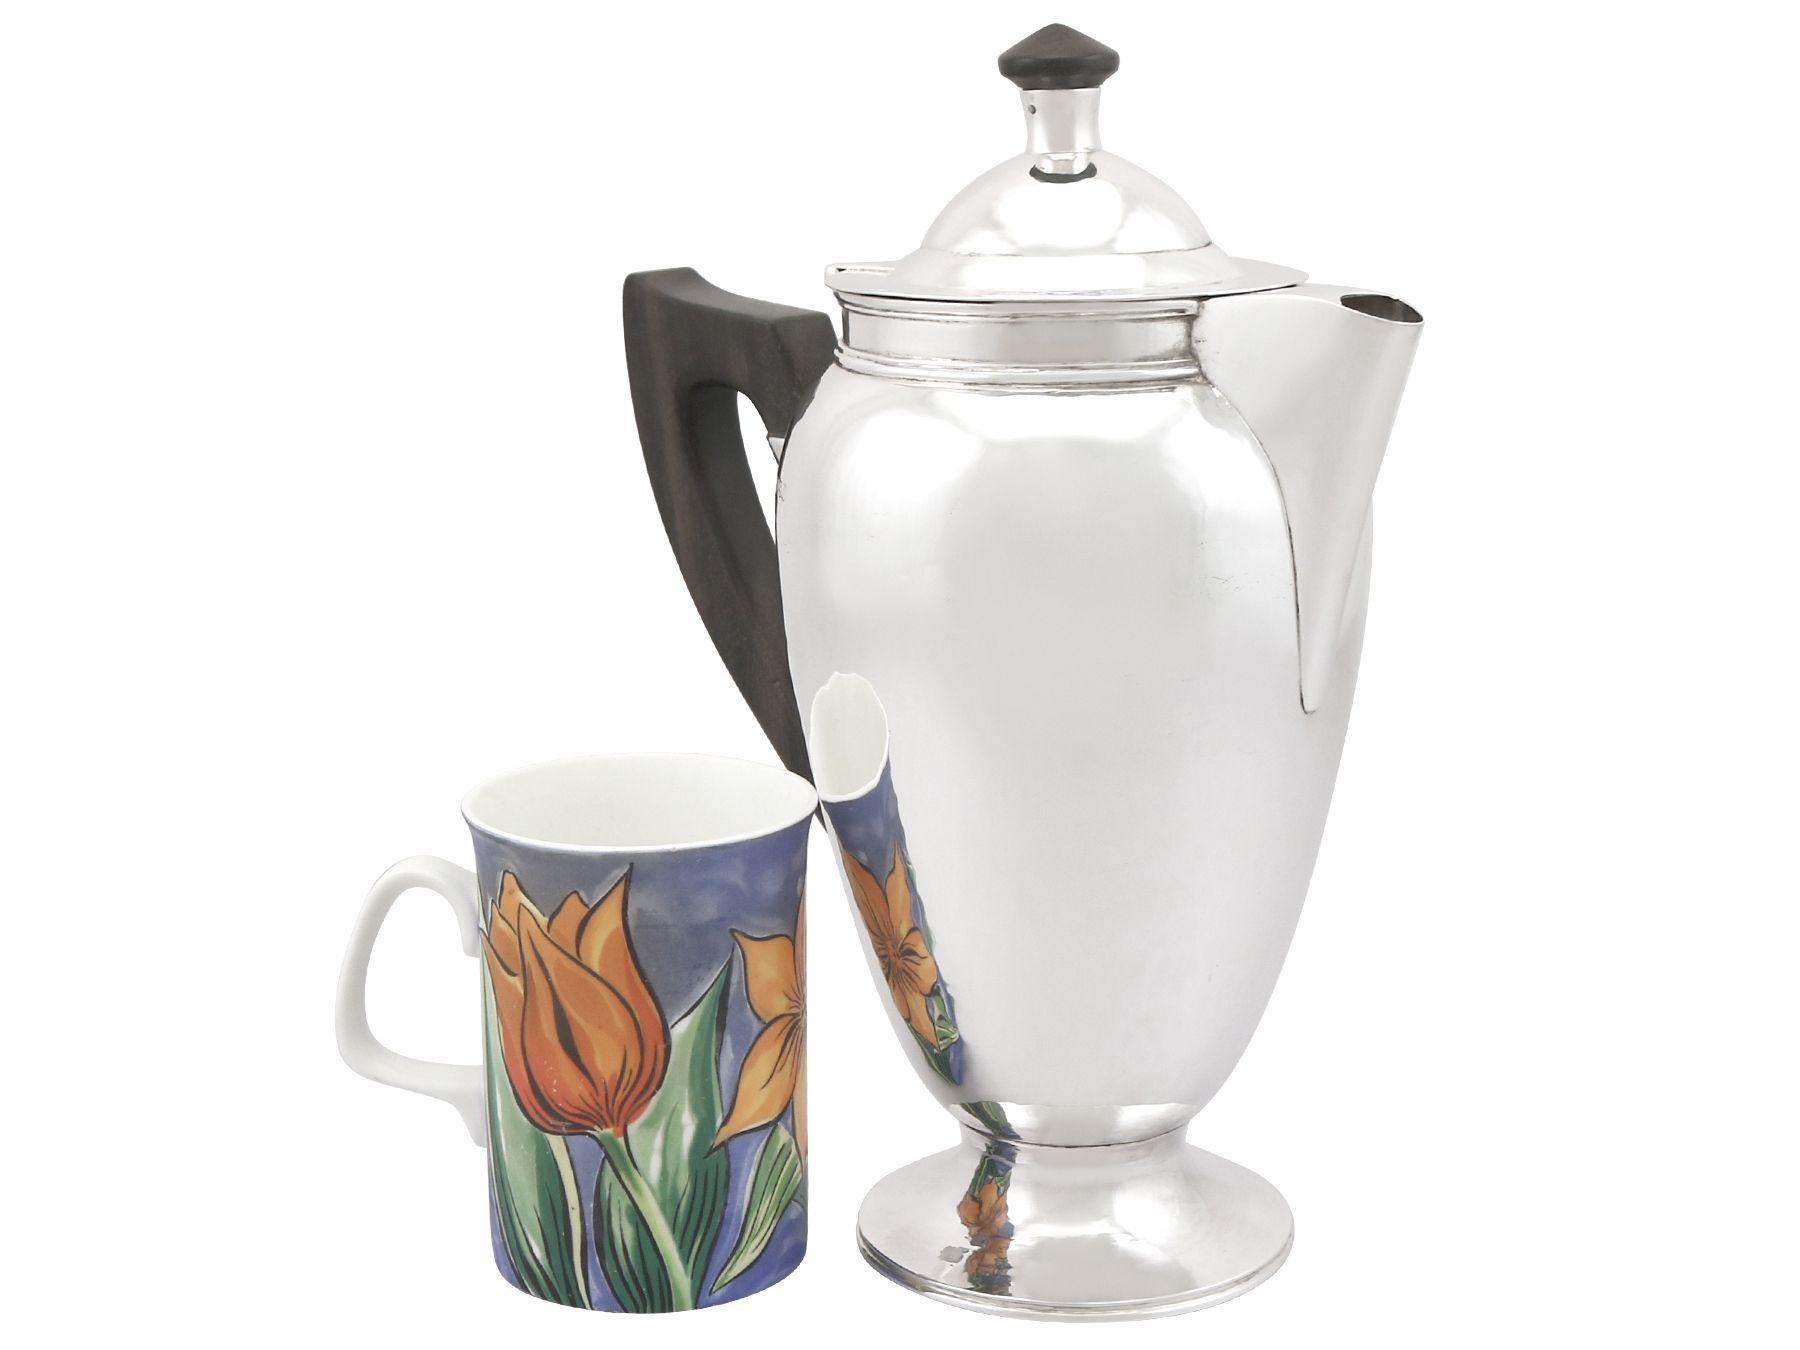 An exceptional, fine and impressive, large vintage George VI English sterling silver coffee pot; an addition to our silver teaware collection

This exceptional, large George VI vintage silver coffee pot has a tapering oval rounded form, in the